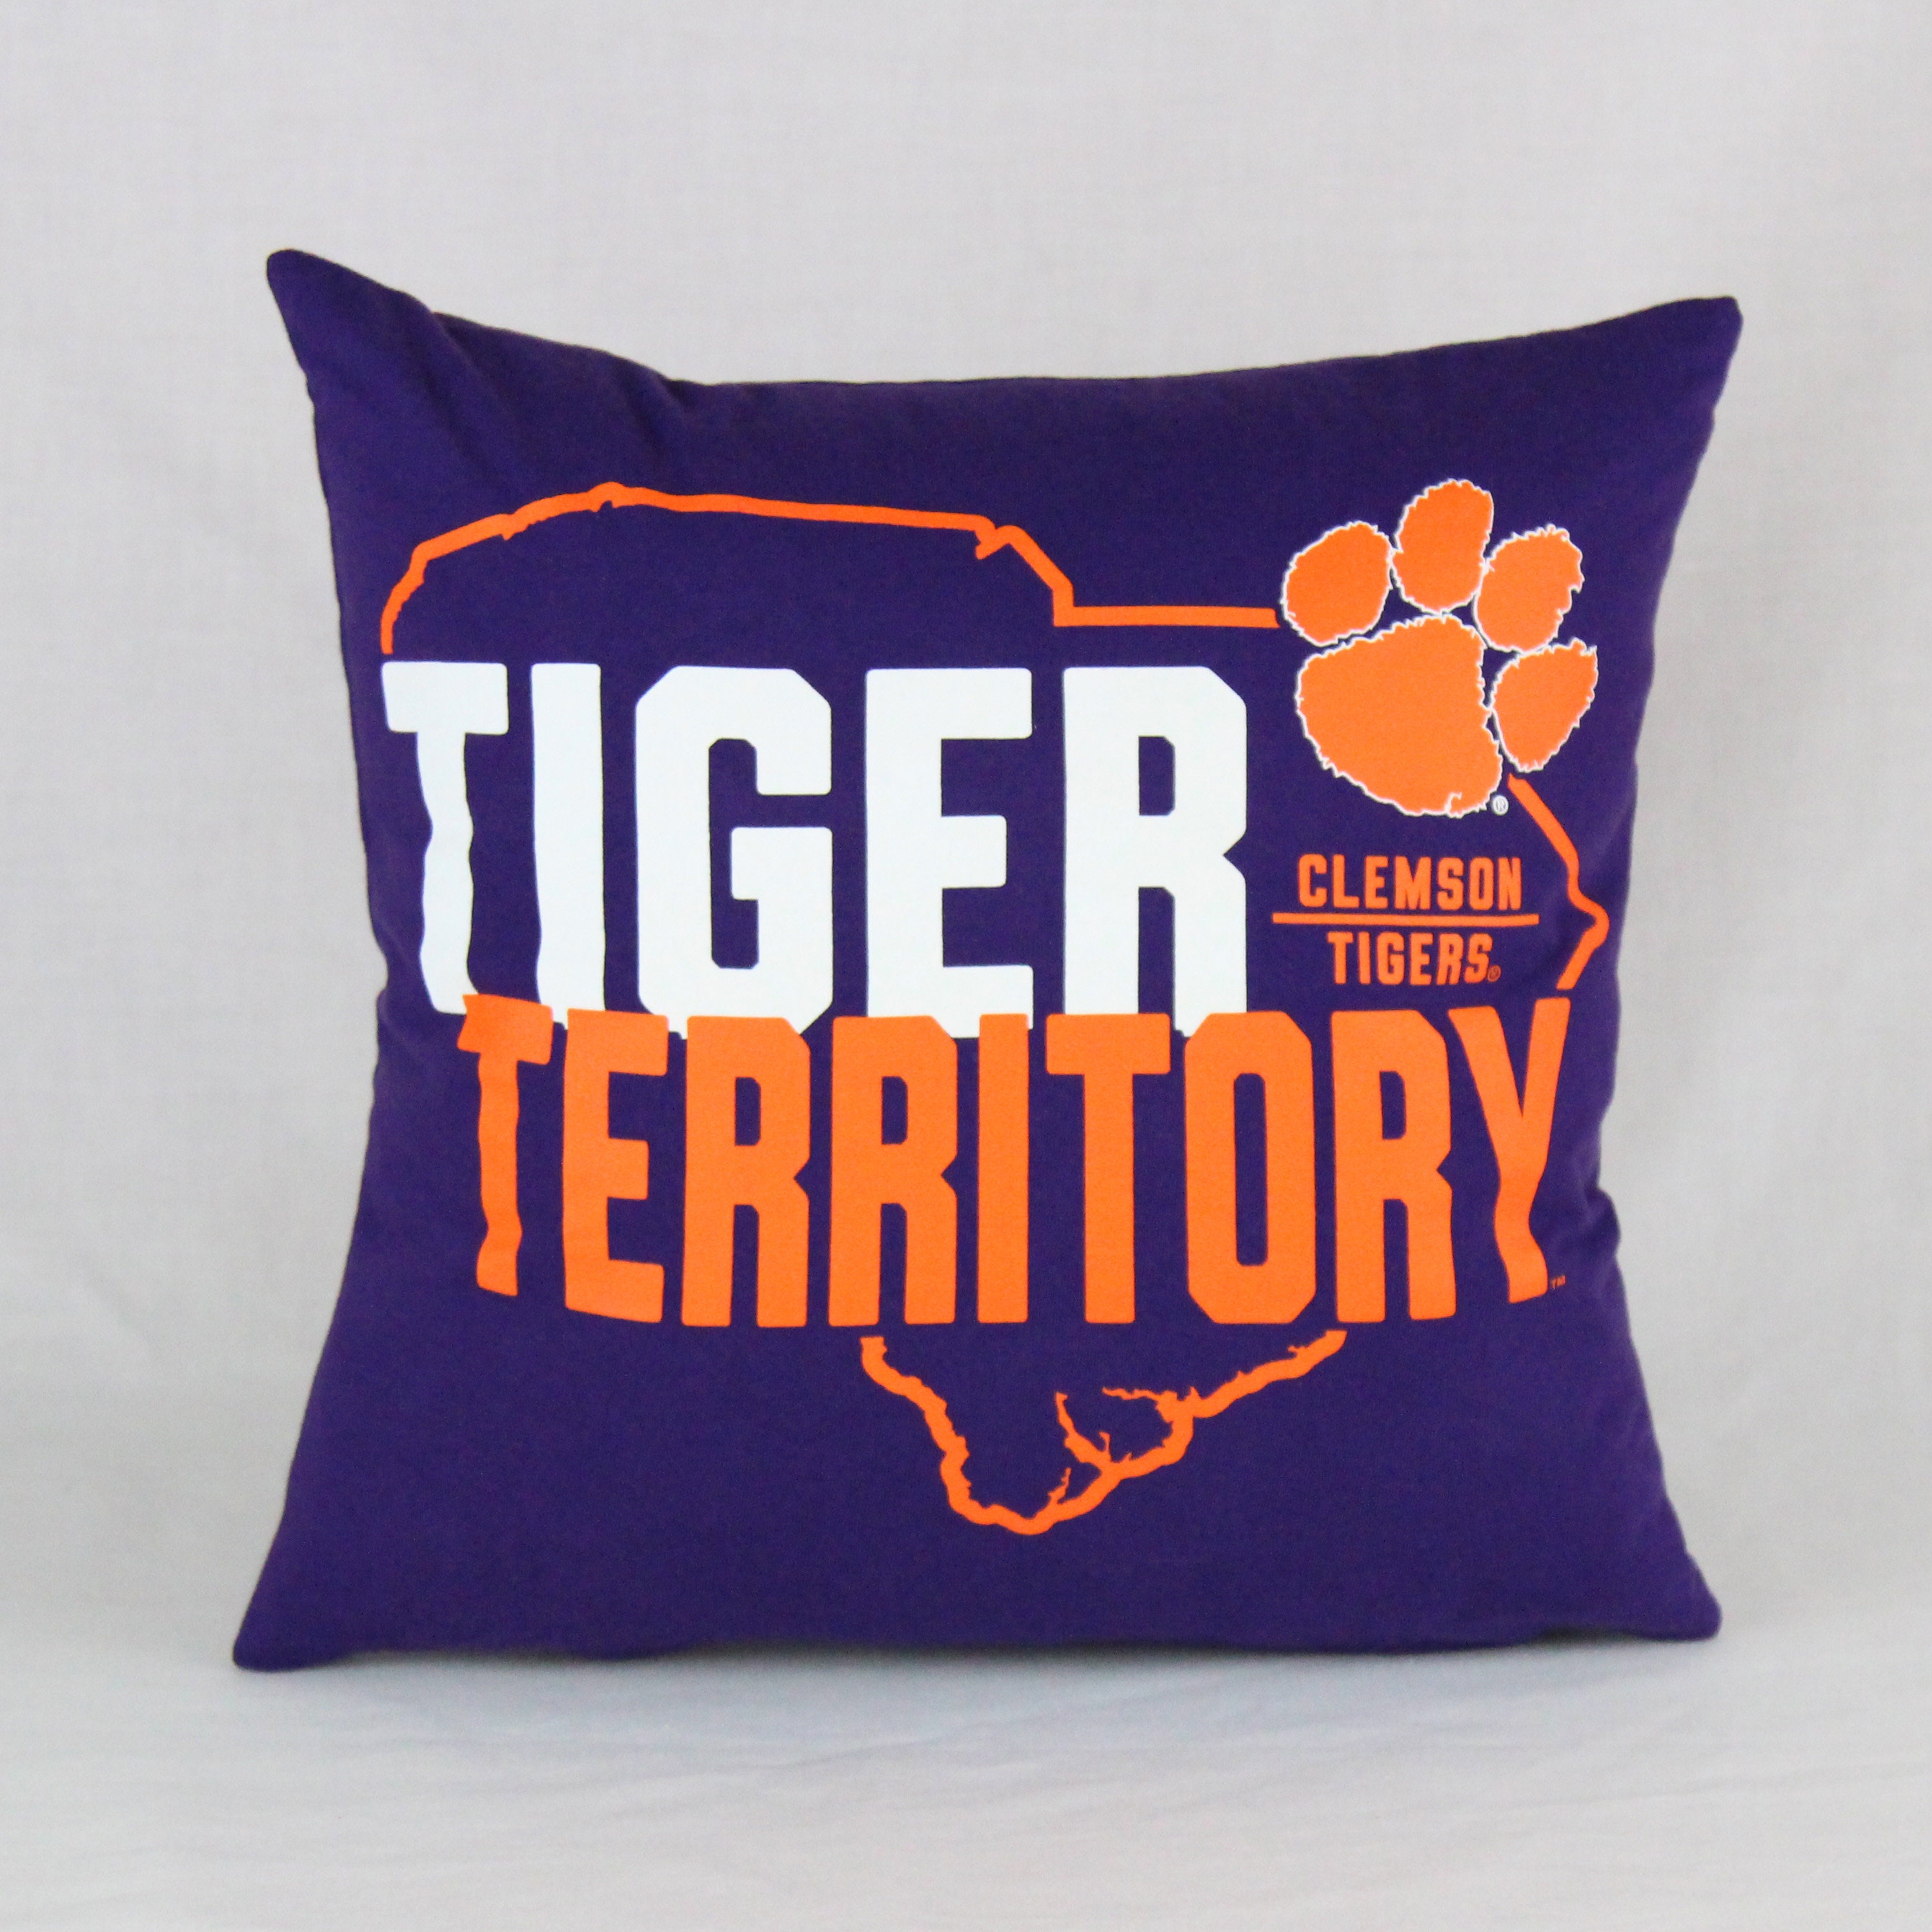 Can be Personalized Made from t Shirt Clemson University 16 Pillow Cover